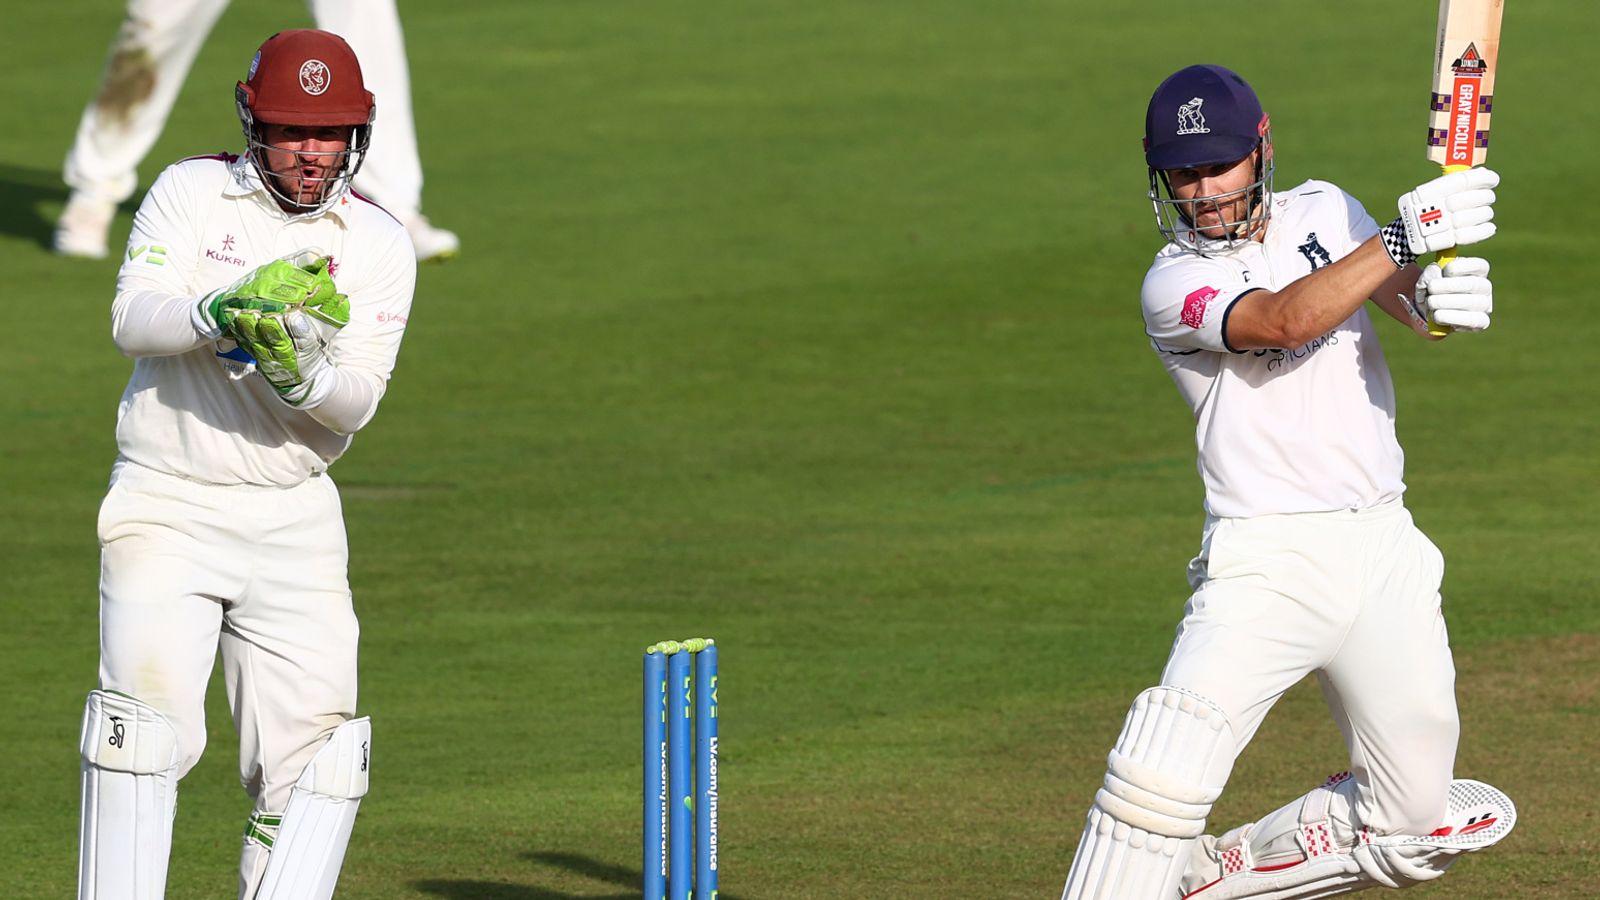 County Championship: Hampshire’s title charge stalled by rivals Lancashire as Warwickshire start well